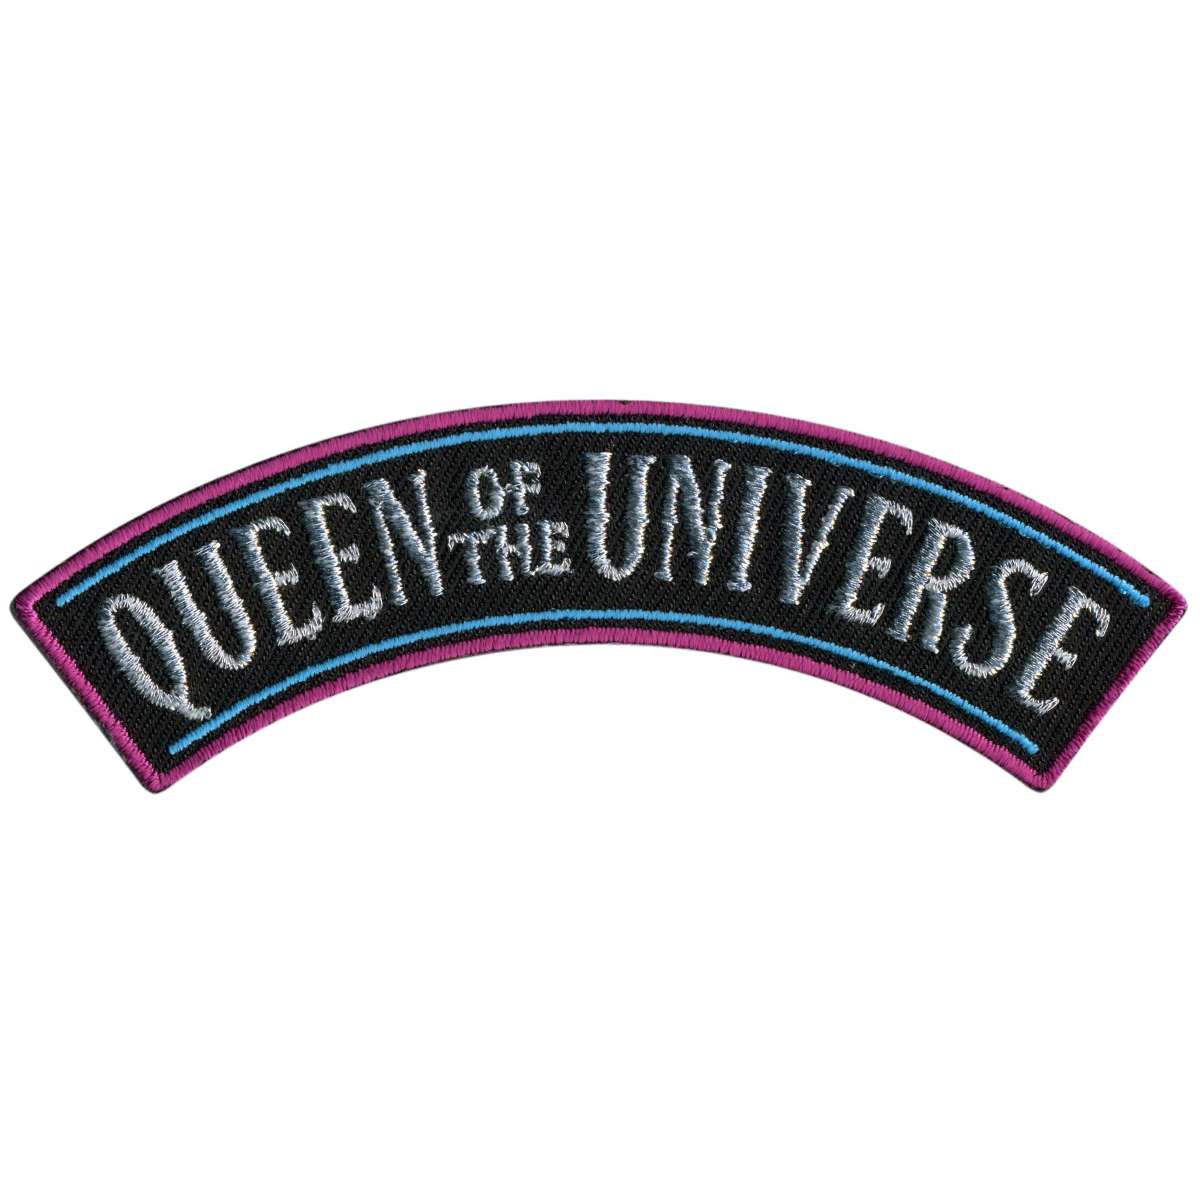 Hot Leathers Queen Of The Universe 4” X 1” Top Rocker Patch PPM4202